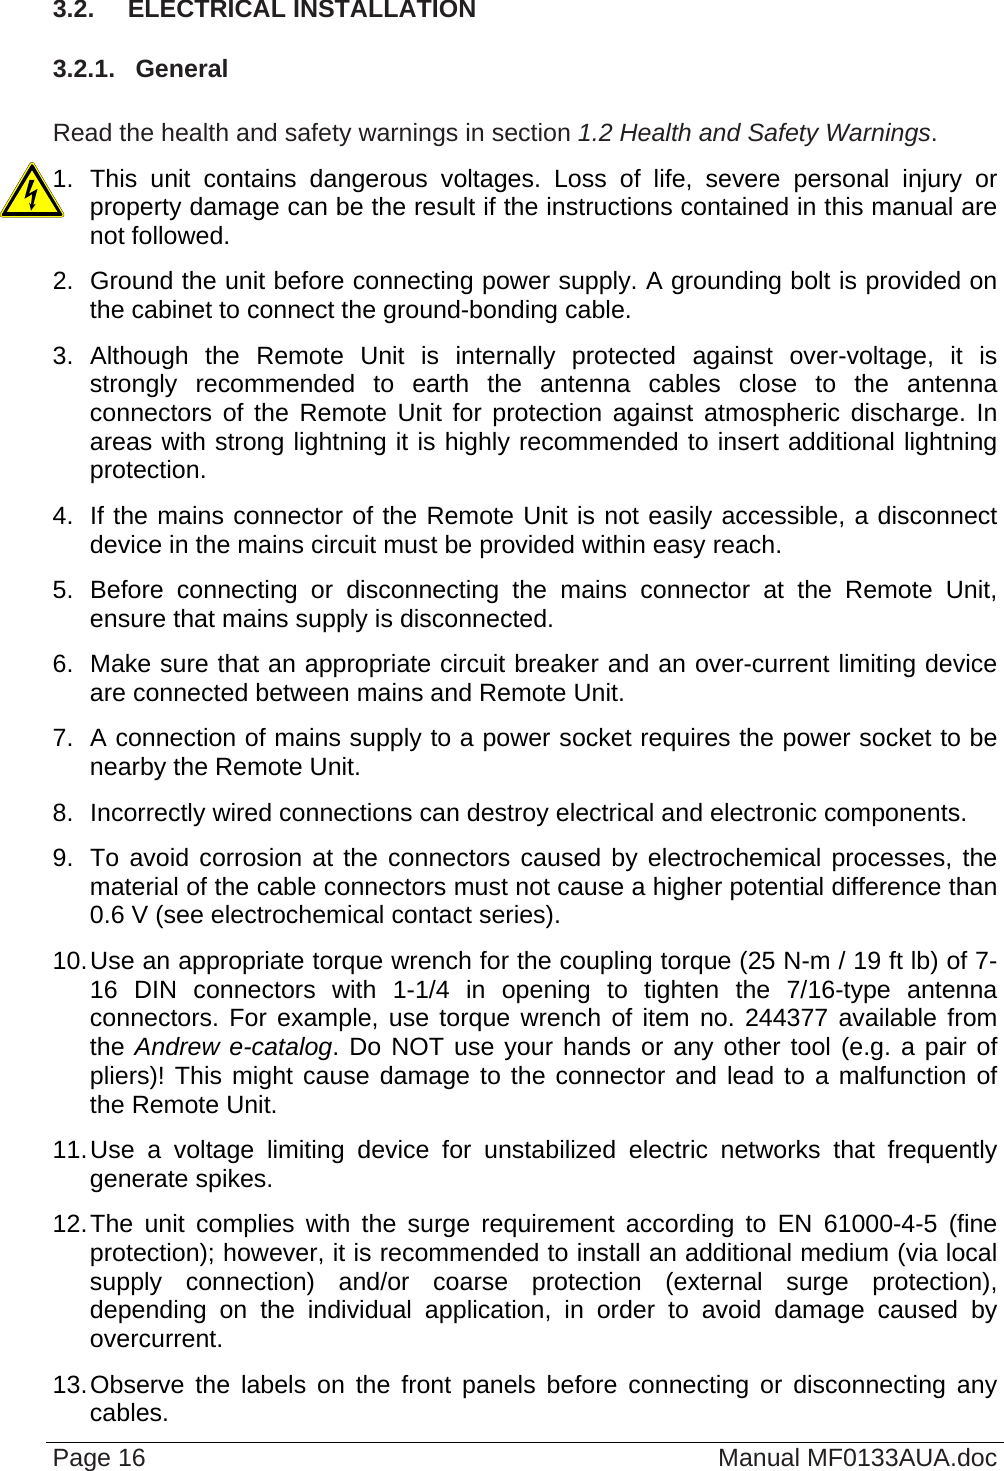  3.2.  ELECTRICAL INSTALLATION 3.2.1.  General  Read the health and safety warnings in section 1.2 Health and Safety Warnings. 1. This unit contains dangerous voltages. Loss of life, severe personal injury or property damage can be the result if the instructions contained in this manual are not followed. 2.  Ground the unit before connecting power supply. A grounding bolt is provided on the cabinet to connect the ground-bonding cable. 3. Although the Remote Unit is internally protected against over-voltage, it is strongly recommended to earth the antenna cables close to the antenna connectors of the Remote Unit for protection against atmospheric discharge. In areas with strong lightning it is highly recommended to insert additional lightning protection. 4.  If the mains connector of the Remote Unit is not easily accessible, a disconnect device in the mains circuit must be provided within easy reach. 5. Before connecting or disconnecting the mains connector at the Remote Unit, ensure that mains supply is disconnected. 6.  Make sure that an appropriate circuit breaker and an over-current limiting device are connected between mains and Remote Unit. 7.  A connection of mains supply to a power socket requires the power socket to be nearby the Remote Unit. 8.  Incorrectly wired connections can destroy electrical and electronic components. 9.  To avoid corrosion at the connectors caused by electrochemical processes, the material of the cable connectors must not cause a higher potential difference than 0.6 V (see electrochemical contact series). 10. Use an appropriate torque wrench for the coupling torque (25 N-m / 19 ft lb) of 7-16 DIN connectors with 1-1/4 in opening to tighten the 7/16-type antenna connectors. For example, use torque wrench of item no. 244377 available from the Andrew e-catalog. Do NOT use your hands or any other tool (e.g. a pair of pliers)! This might cause damage to the connector and lead to a malfunction of the Remote Unit. 11. Use a voltage limiting device for unstabilized electric networks that frequently generate spikes.  12. The unit complies with the surge requirement according to EN 61000-4-5 (fine protection); however, it is recommended to install an additional medium (via local supply connection) and/or coarse protection (external surge protection), depending on the individual application, in order to avoid damage caused by overcurrent. 13. Observe the labels on the front panels before connecting or disconnecting any cables. Page 16  Manual MF0133AUA.doc 